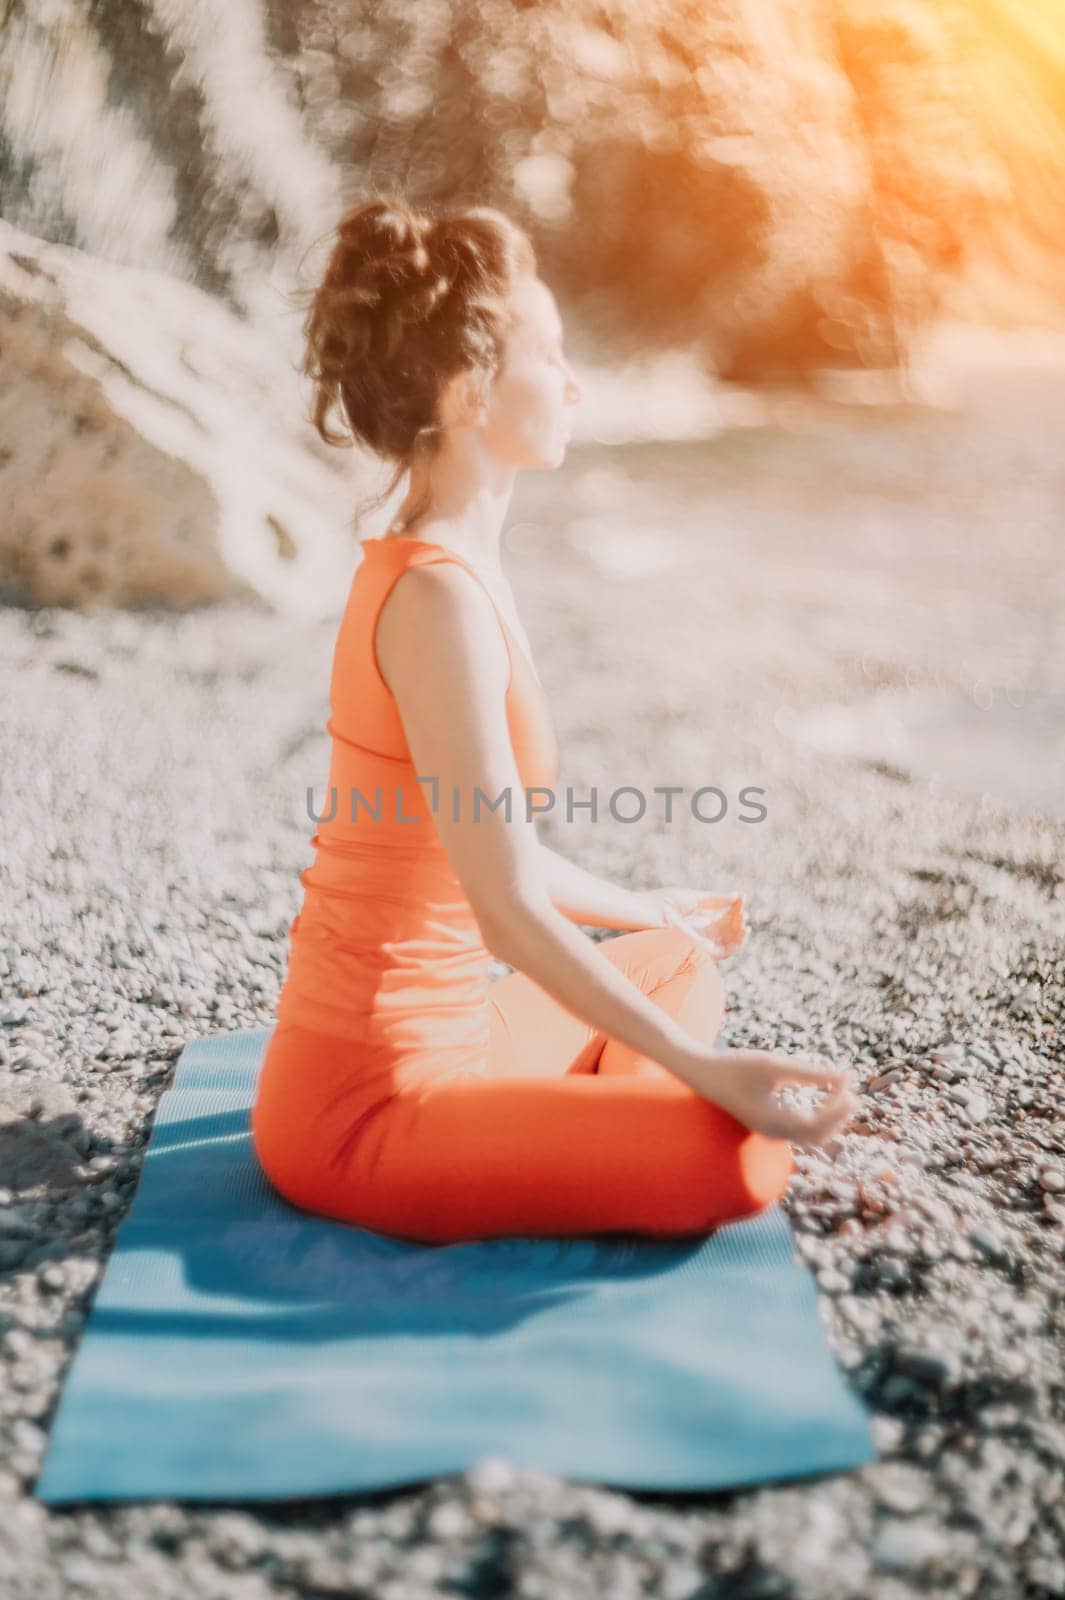 The woman in a red suit practicing yoga on stone at sunrise near the sea. Young beautiful girl in a red bathing suit sits on the seashore in lotus position. Yoga. Healthy lifestyle. Meditation